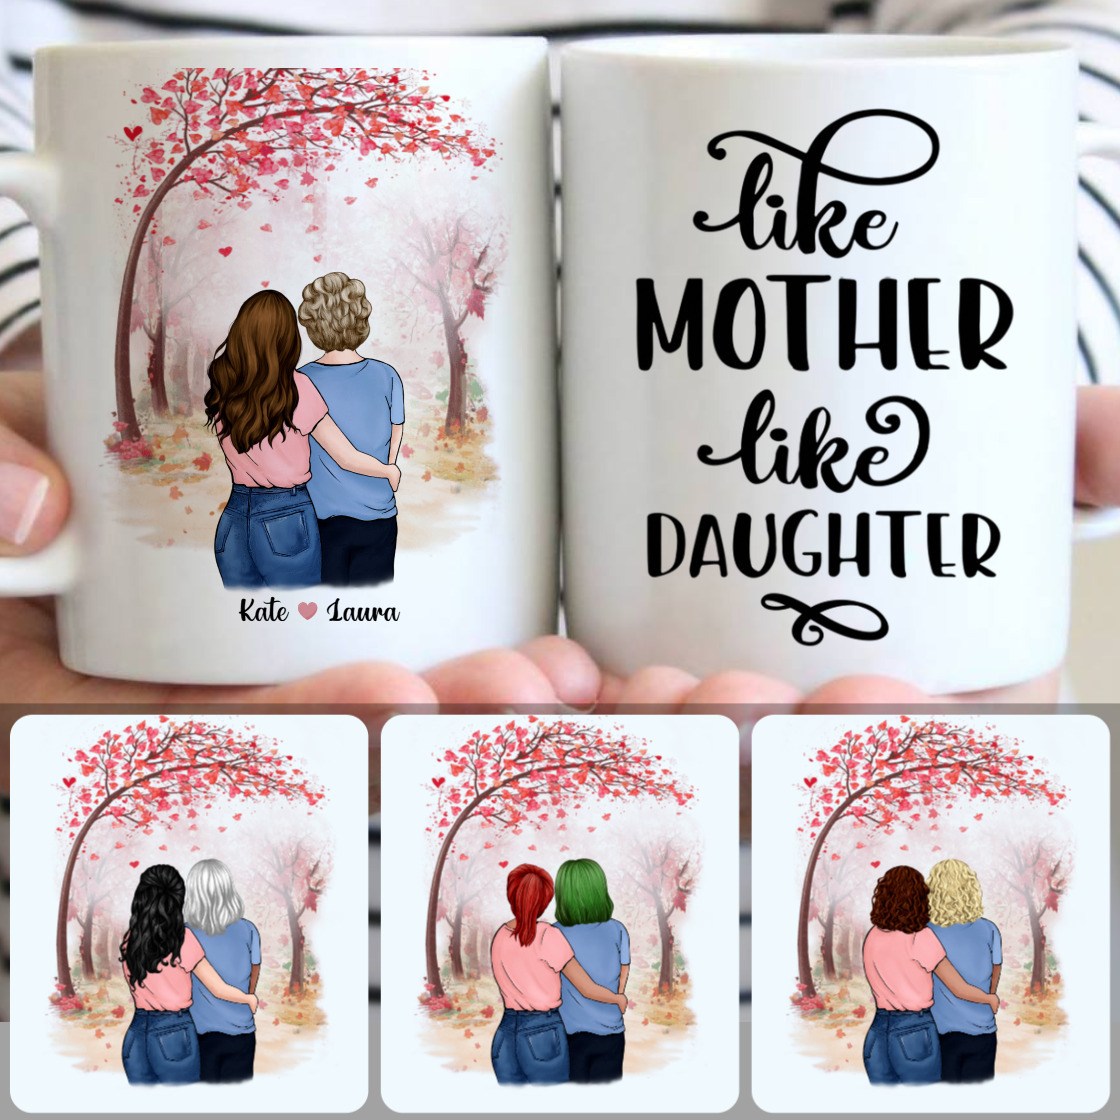 Personalized Mug, Best Gifts For Daughters, Mother & Daughter Customized Coffee Mug With Names